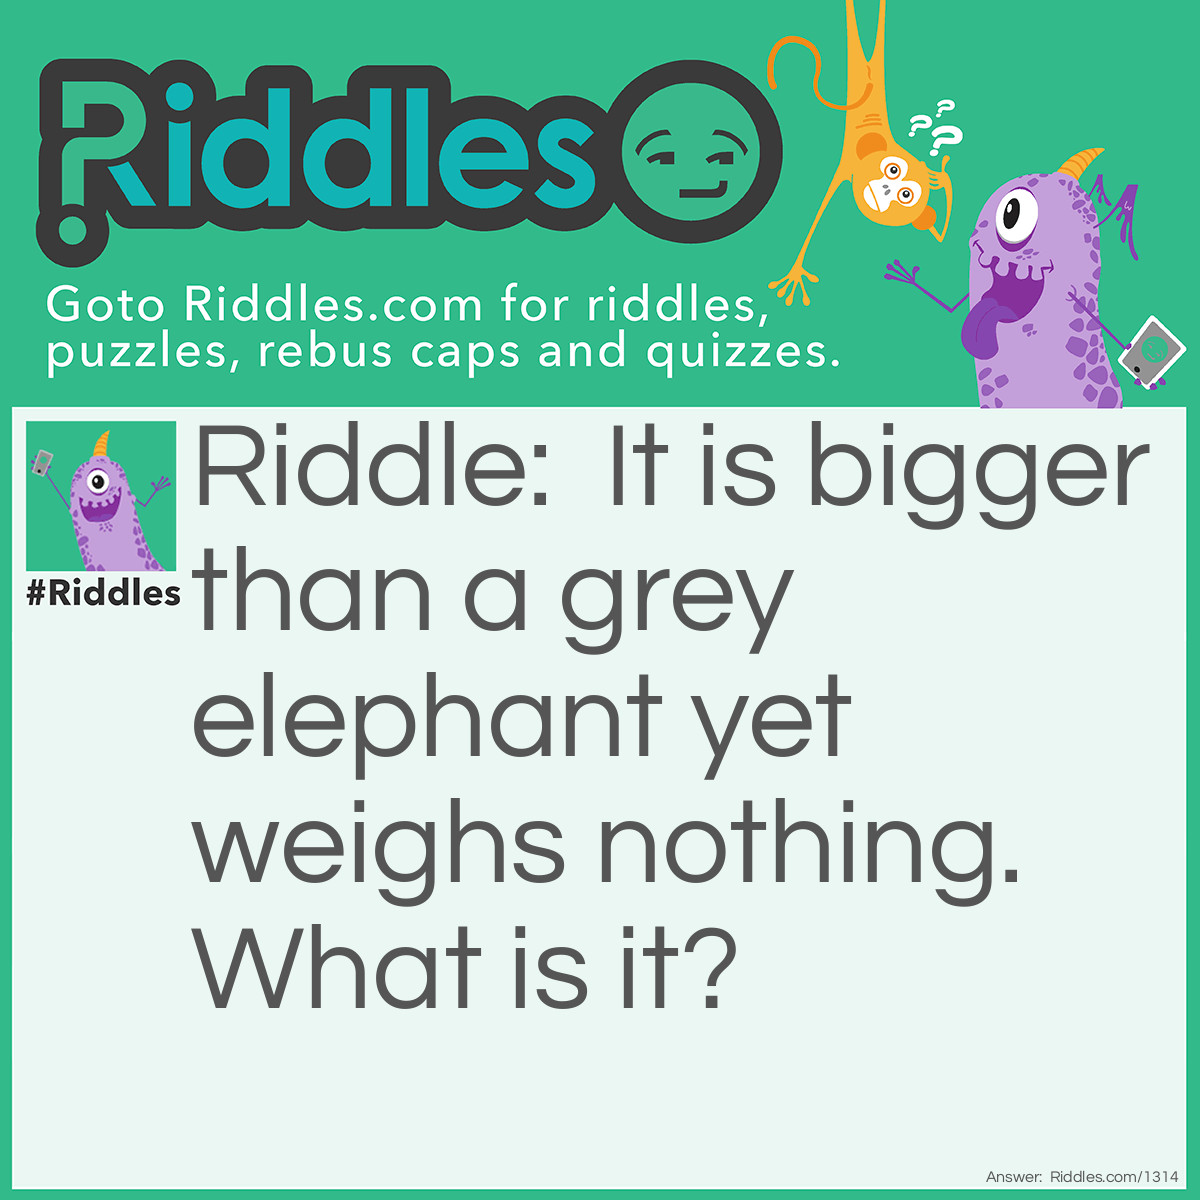 Riddle: What is bigger than a grey elephant yet weighs nothing.
What is it? Answer: The elephants shadow.